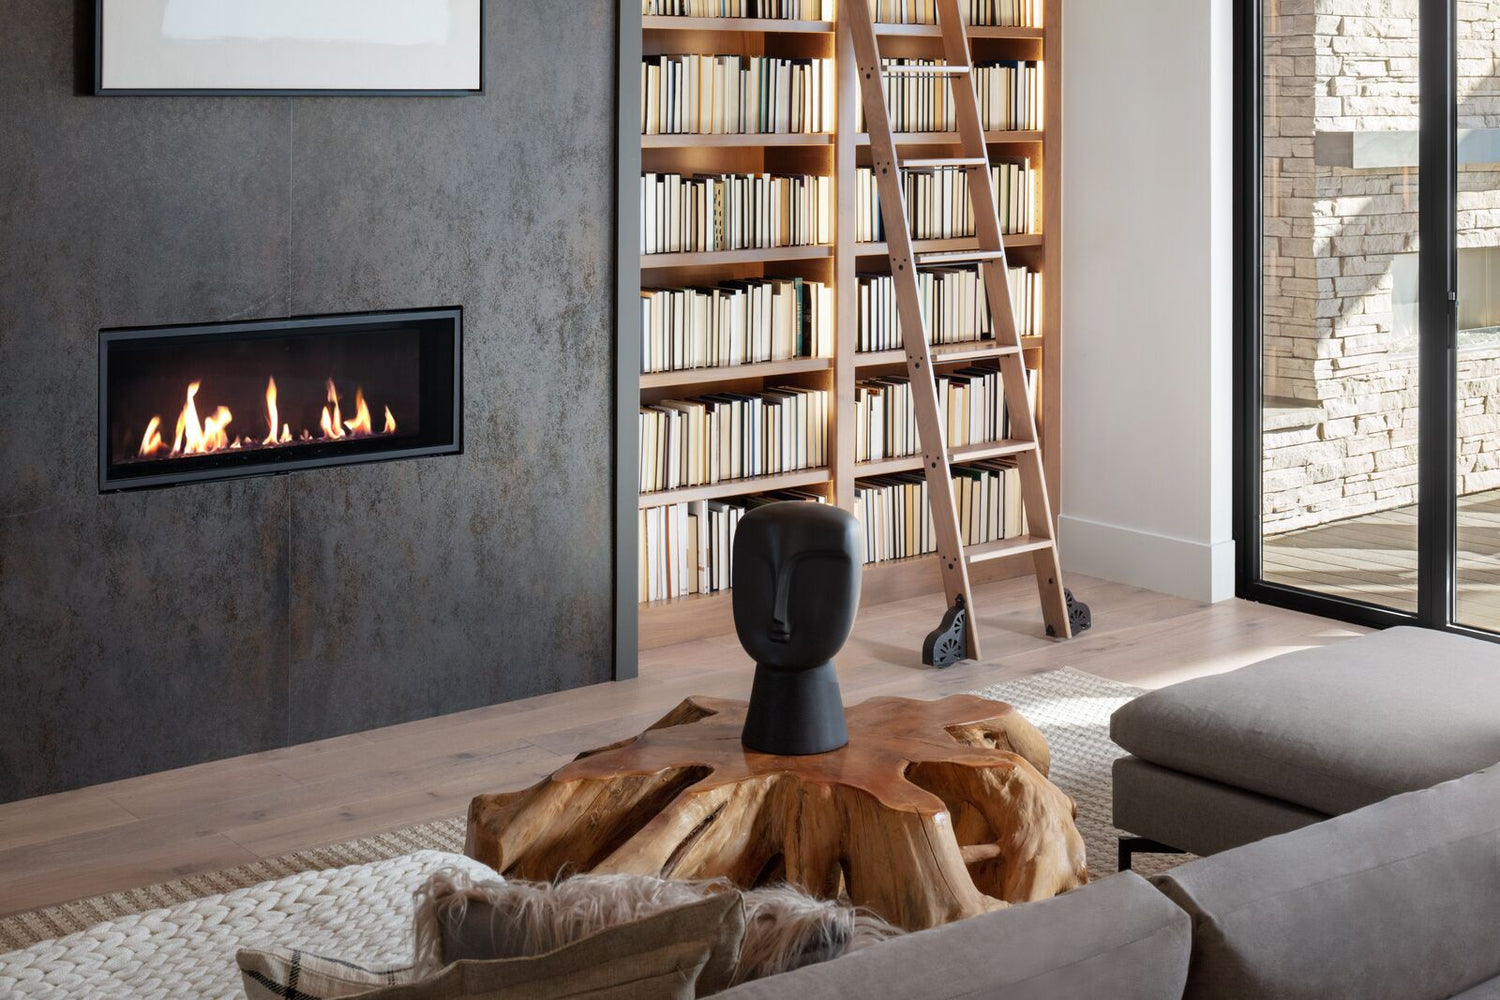 Living room of a home with a wide and short fireplace in its wall